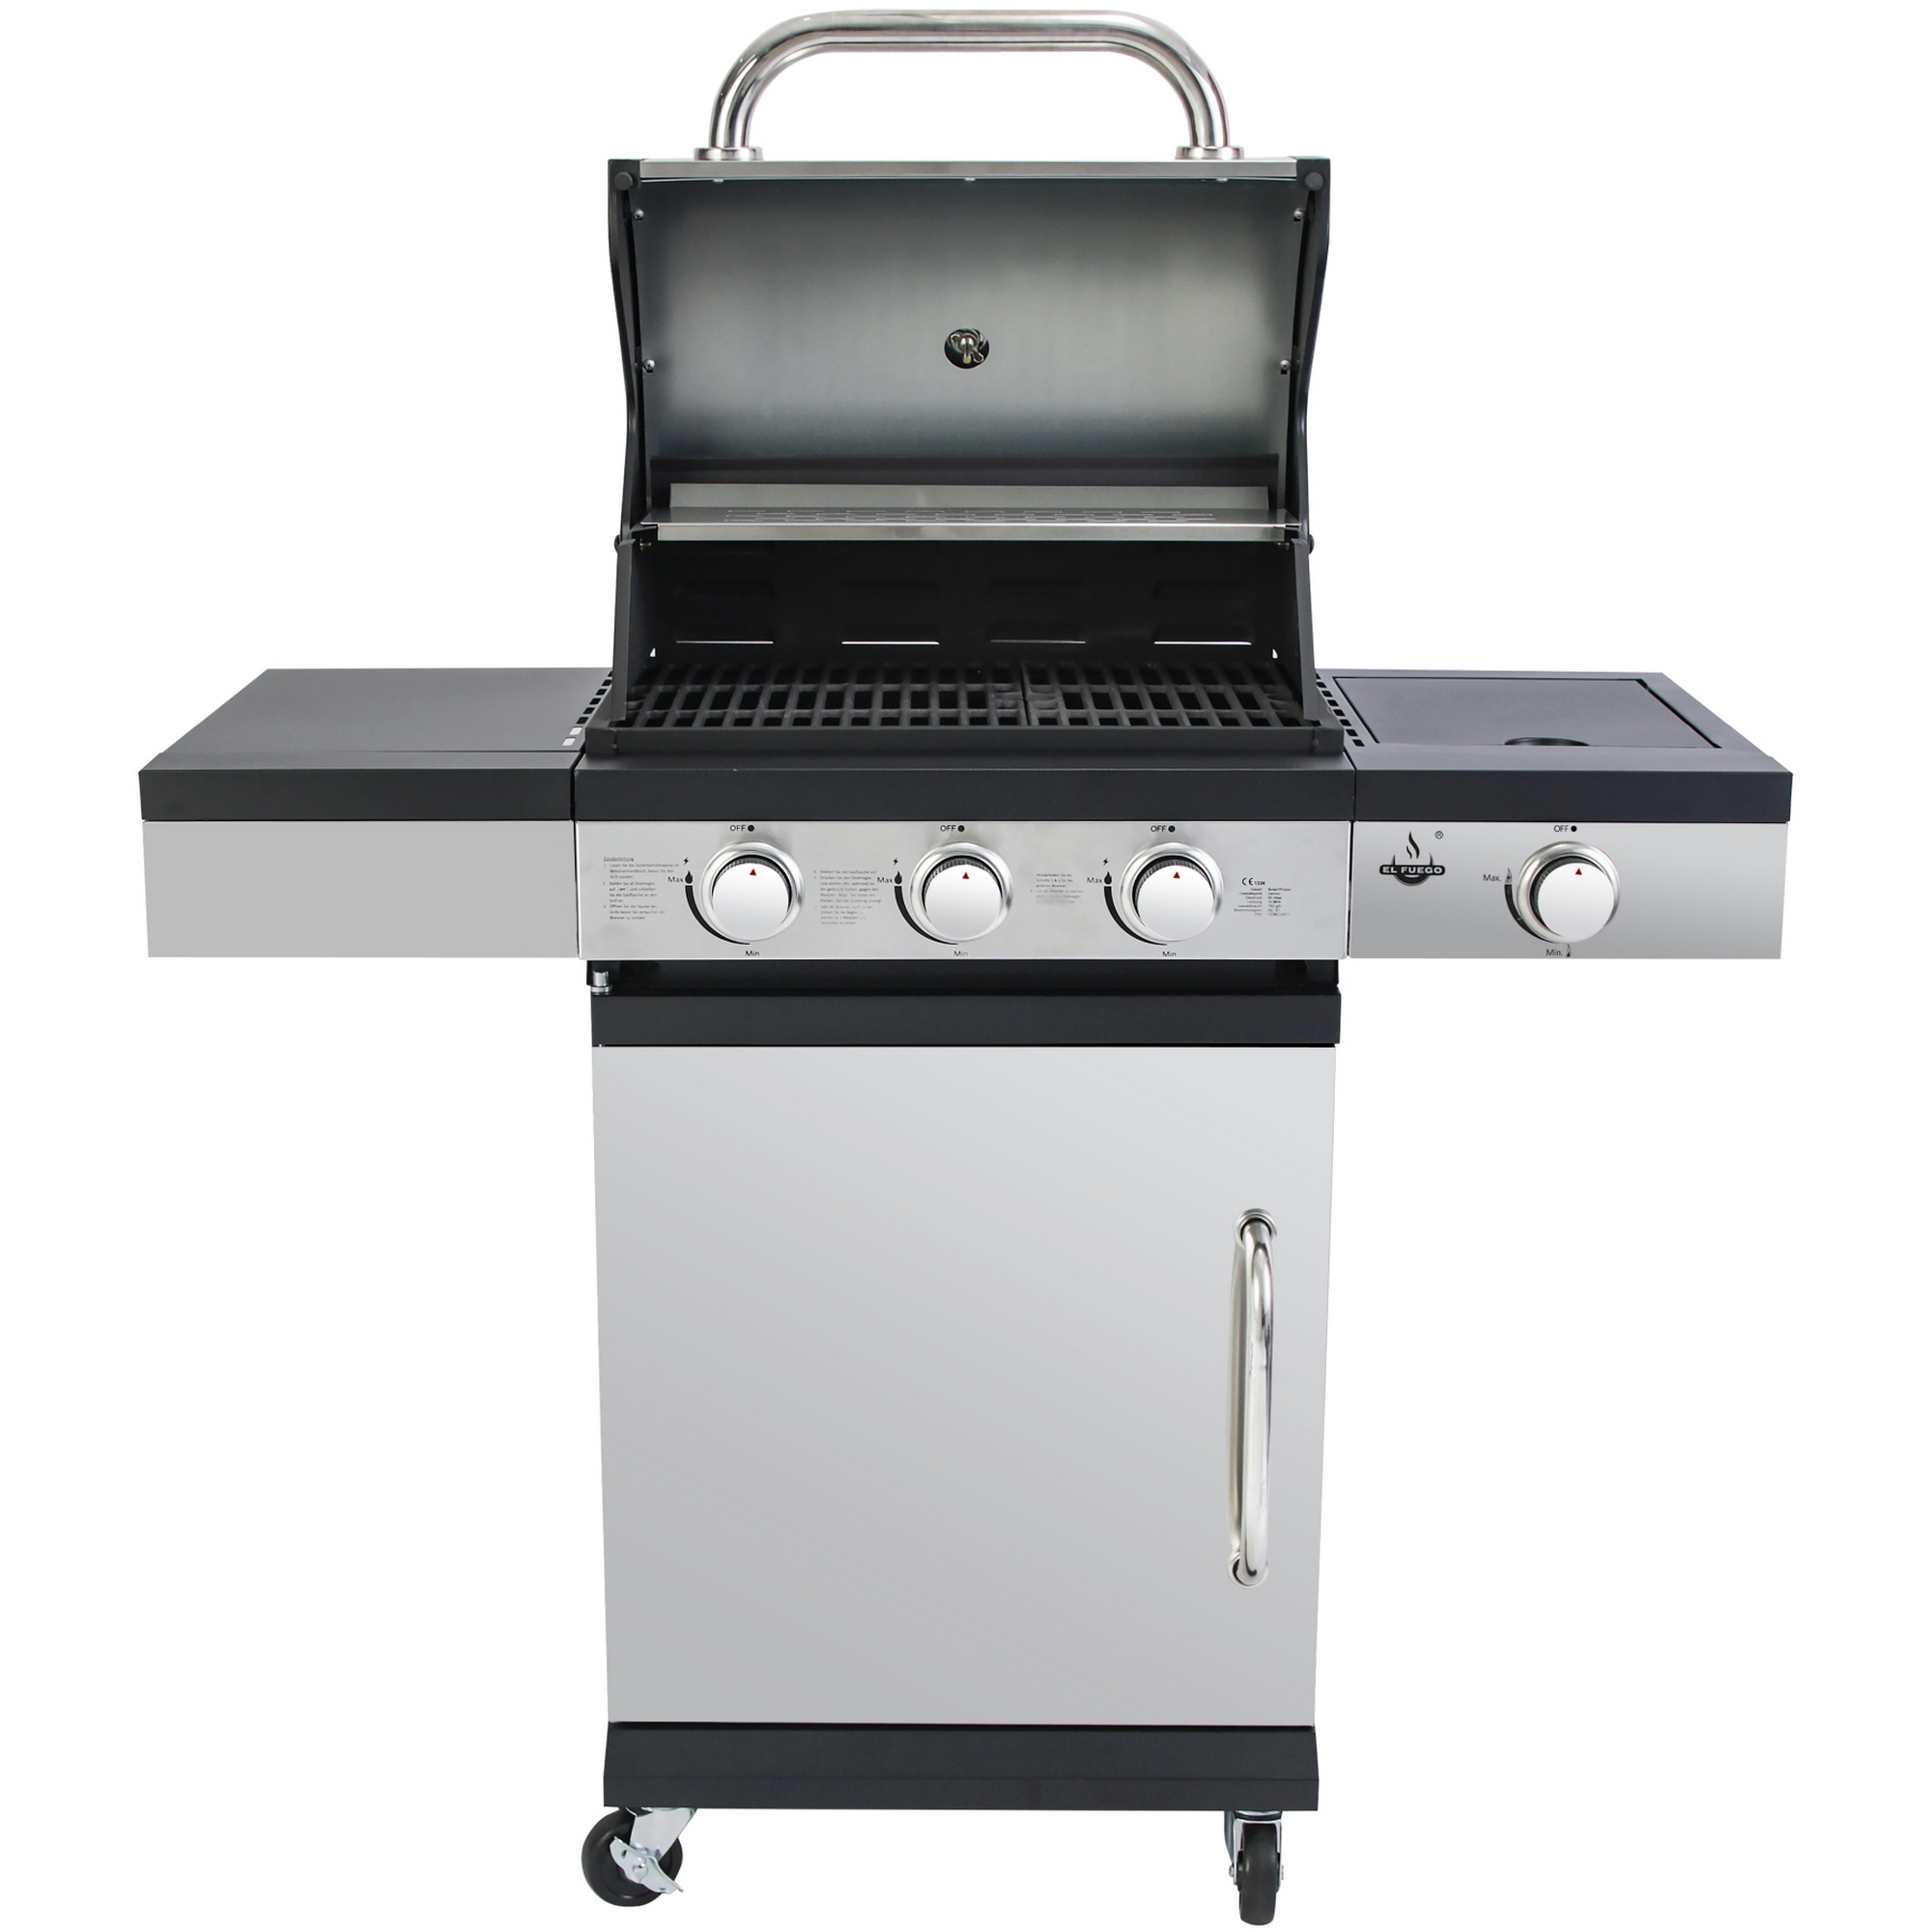 Gasgrill 'San Antonio' silber/schwarz 3+1 Brenner + product picture